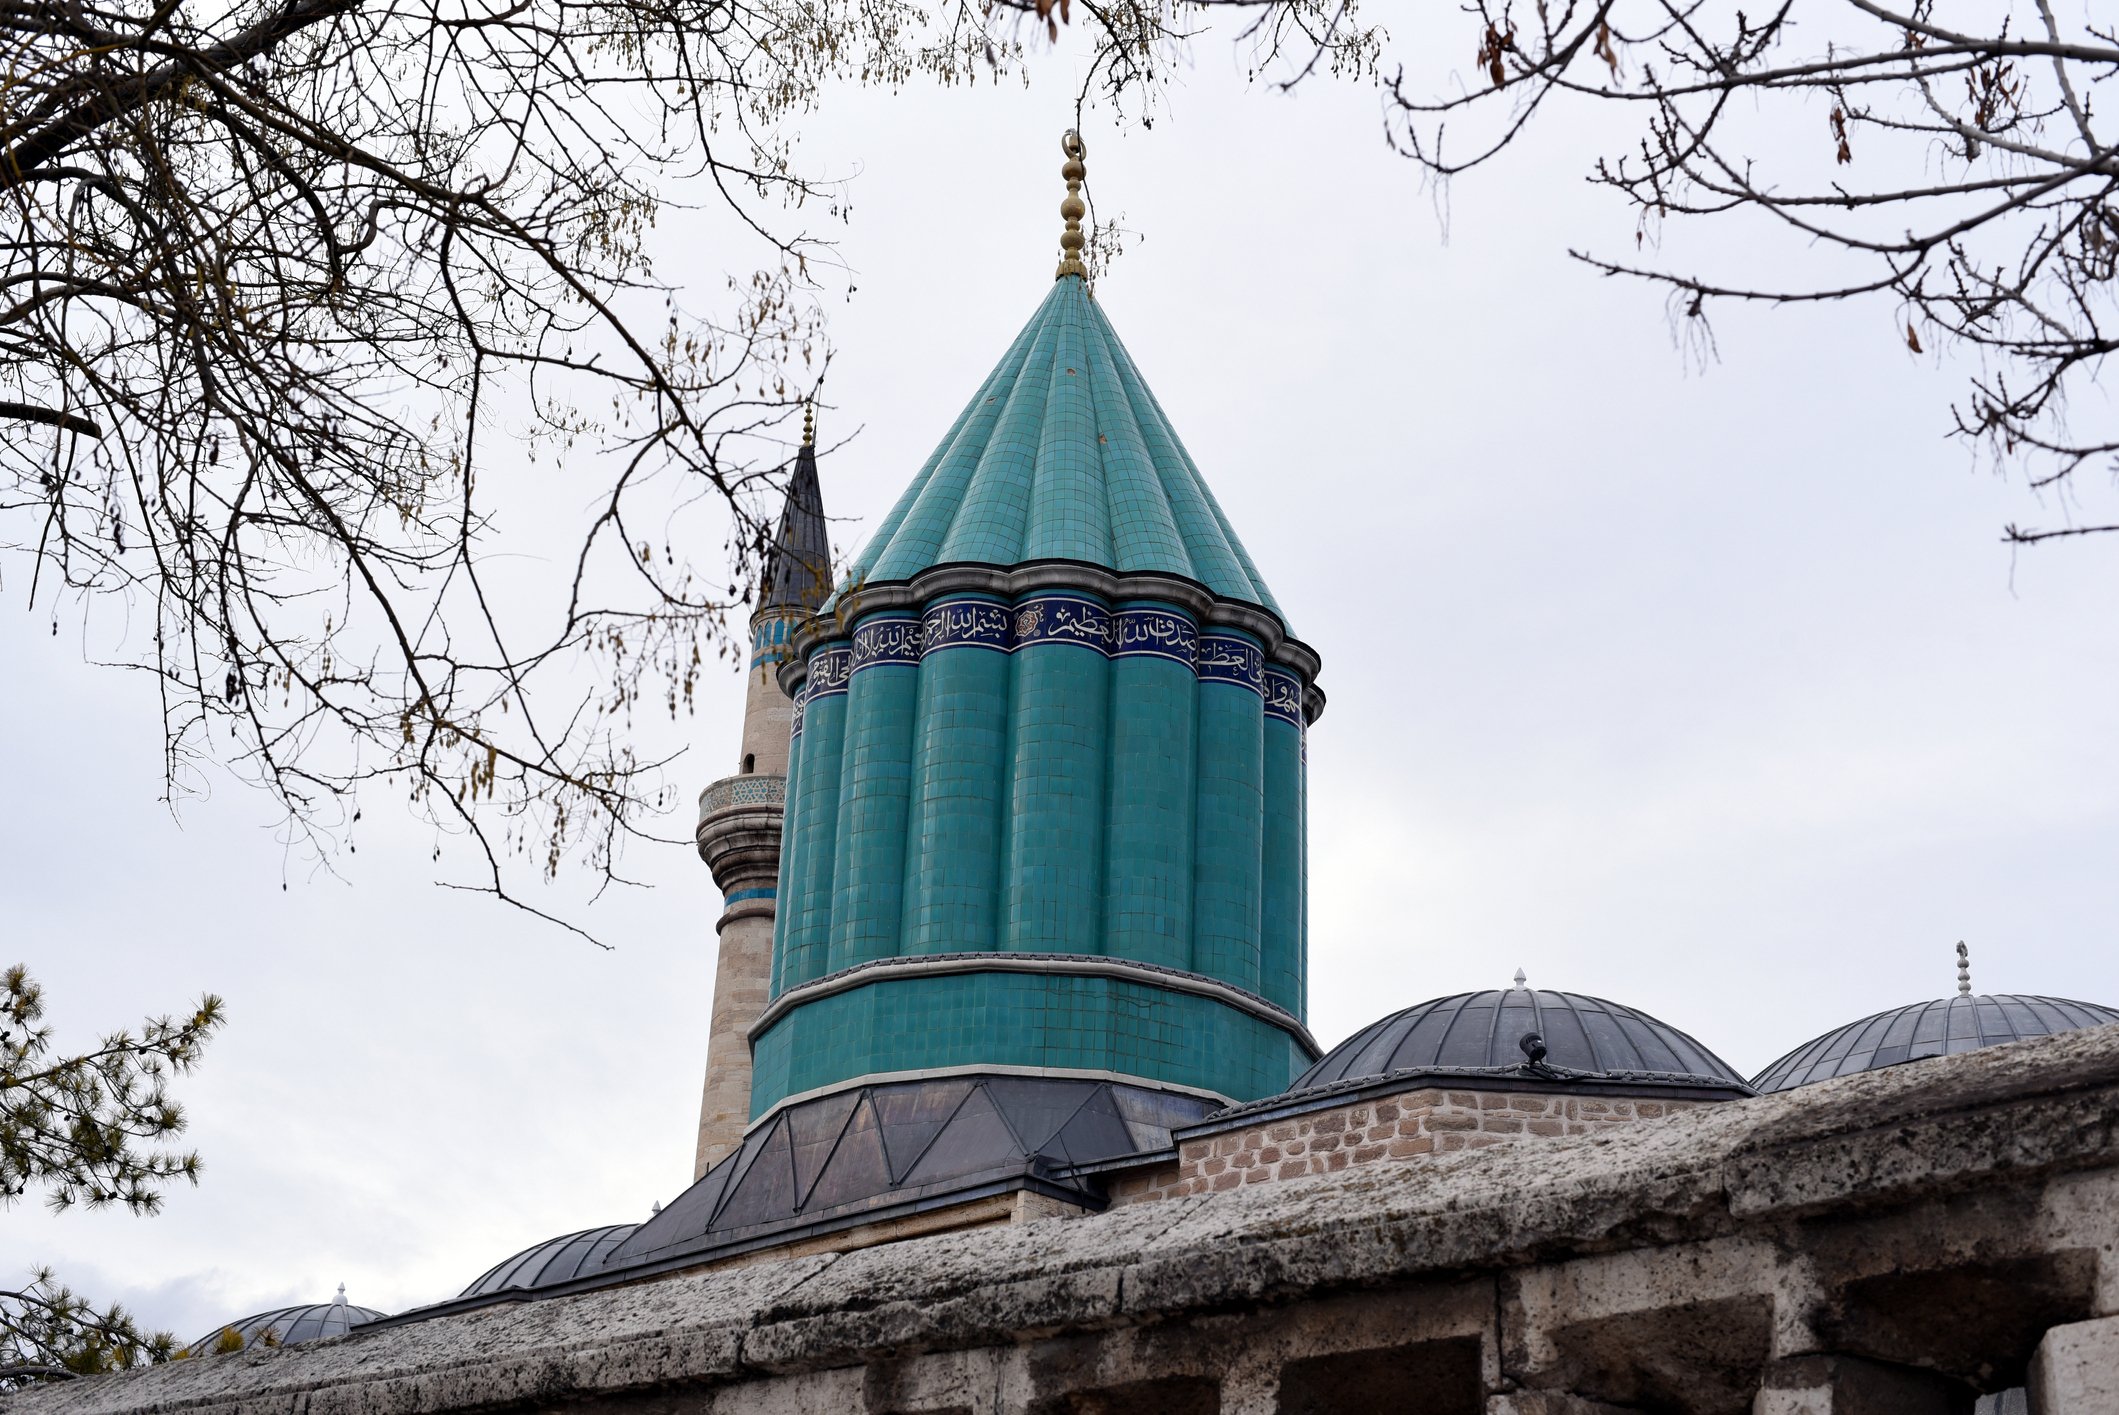 The Green Dome is covered with turquoise tiles. (iStock Photo)